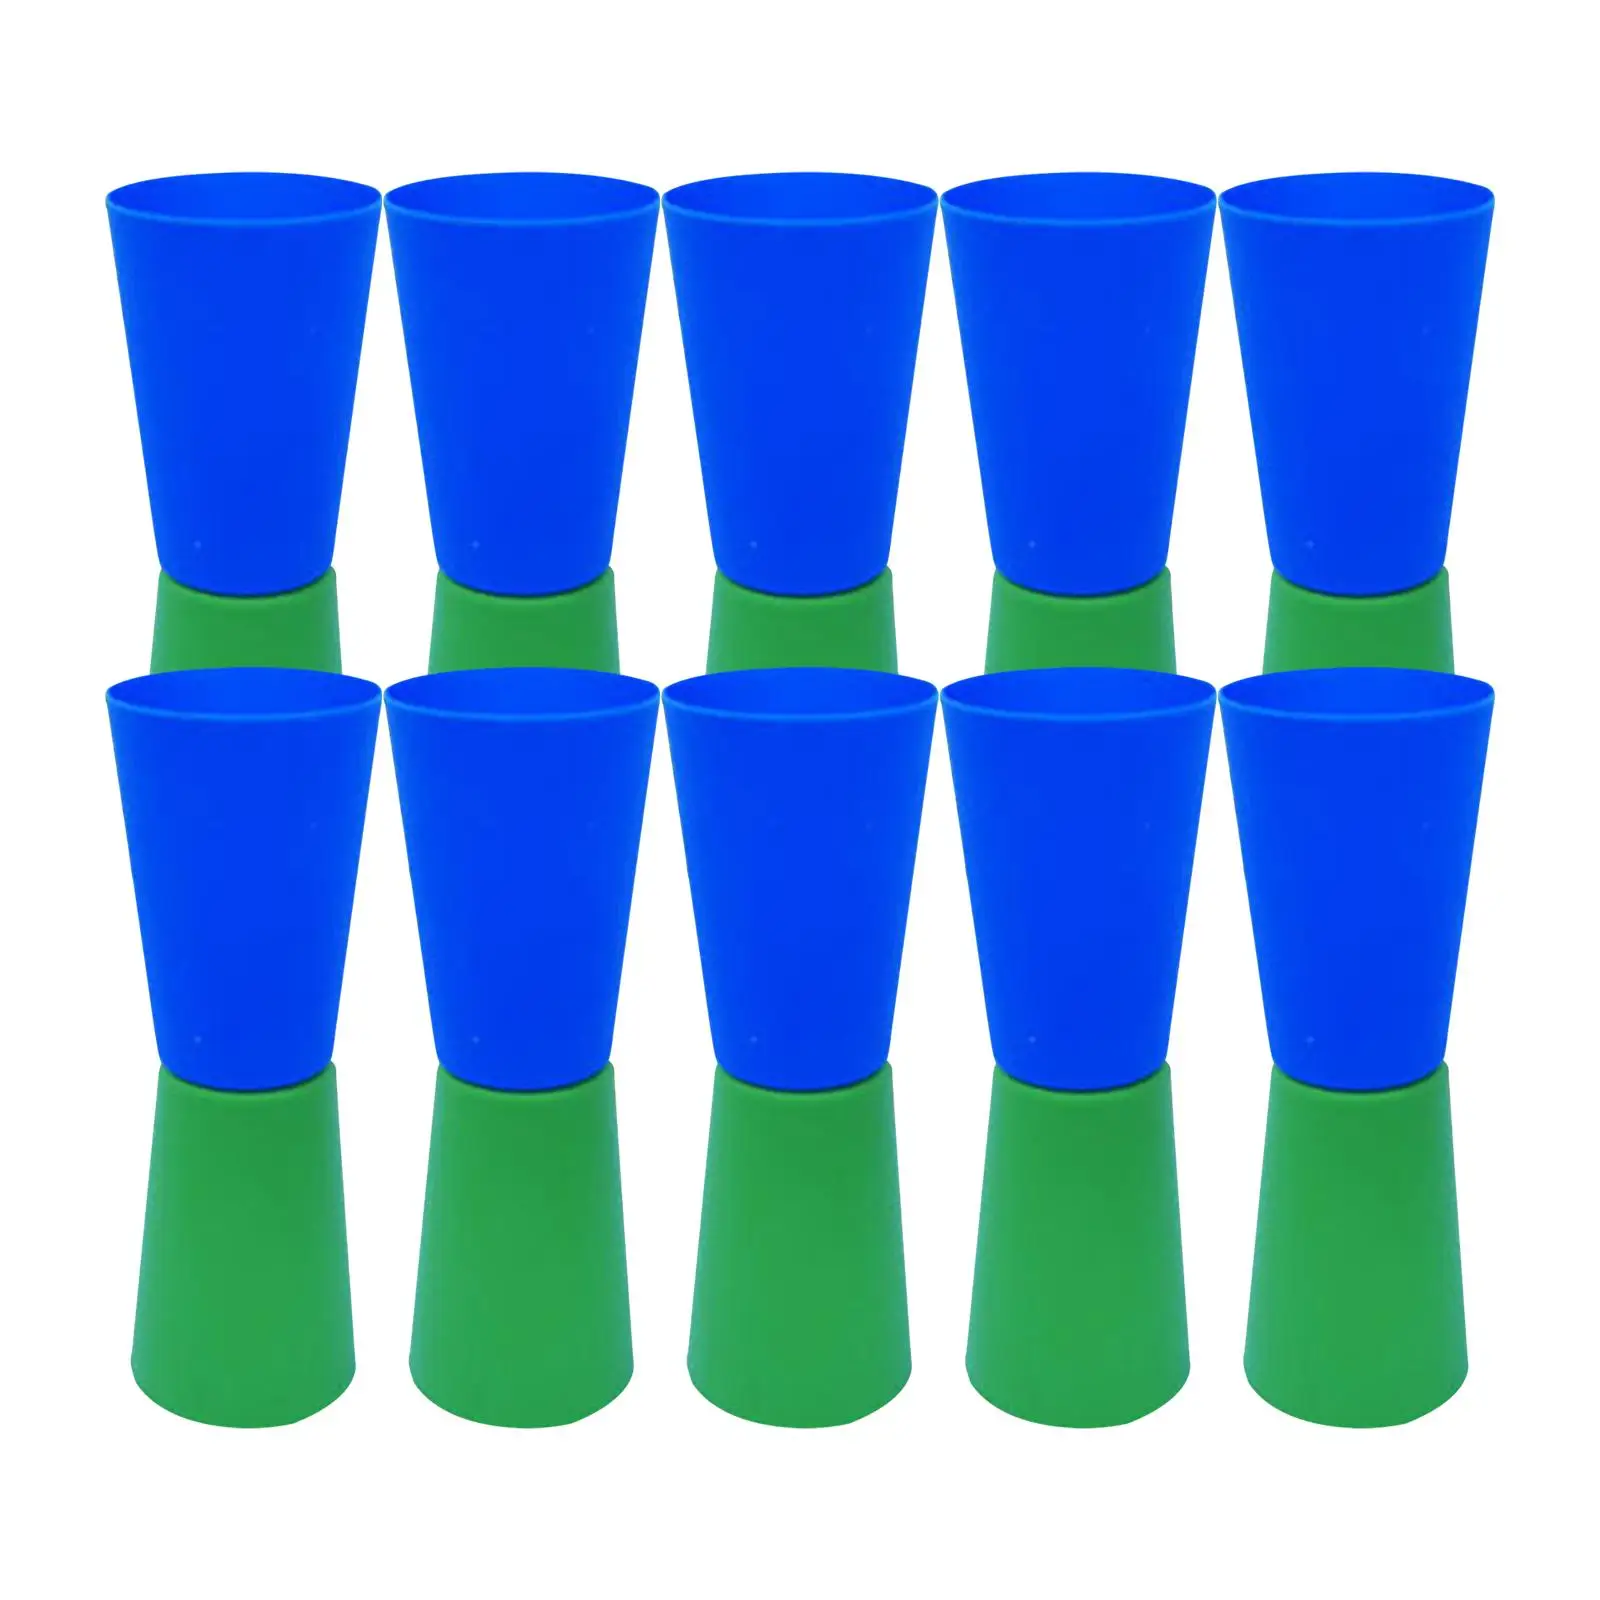 10x Flip Cups Speed Agility Training Running Sport Equipment Fitness Exercise for Gym Football Rugby Basketball with Storage Net